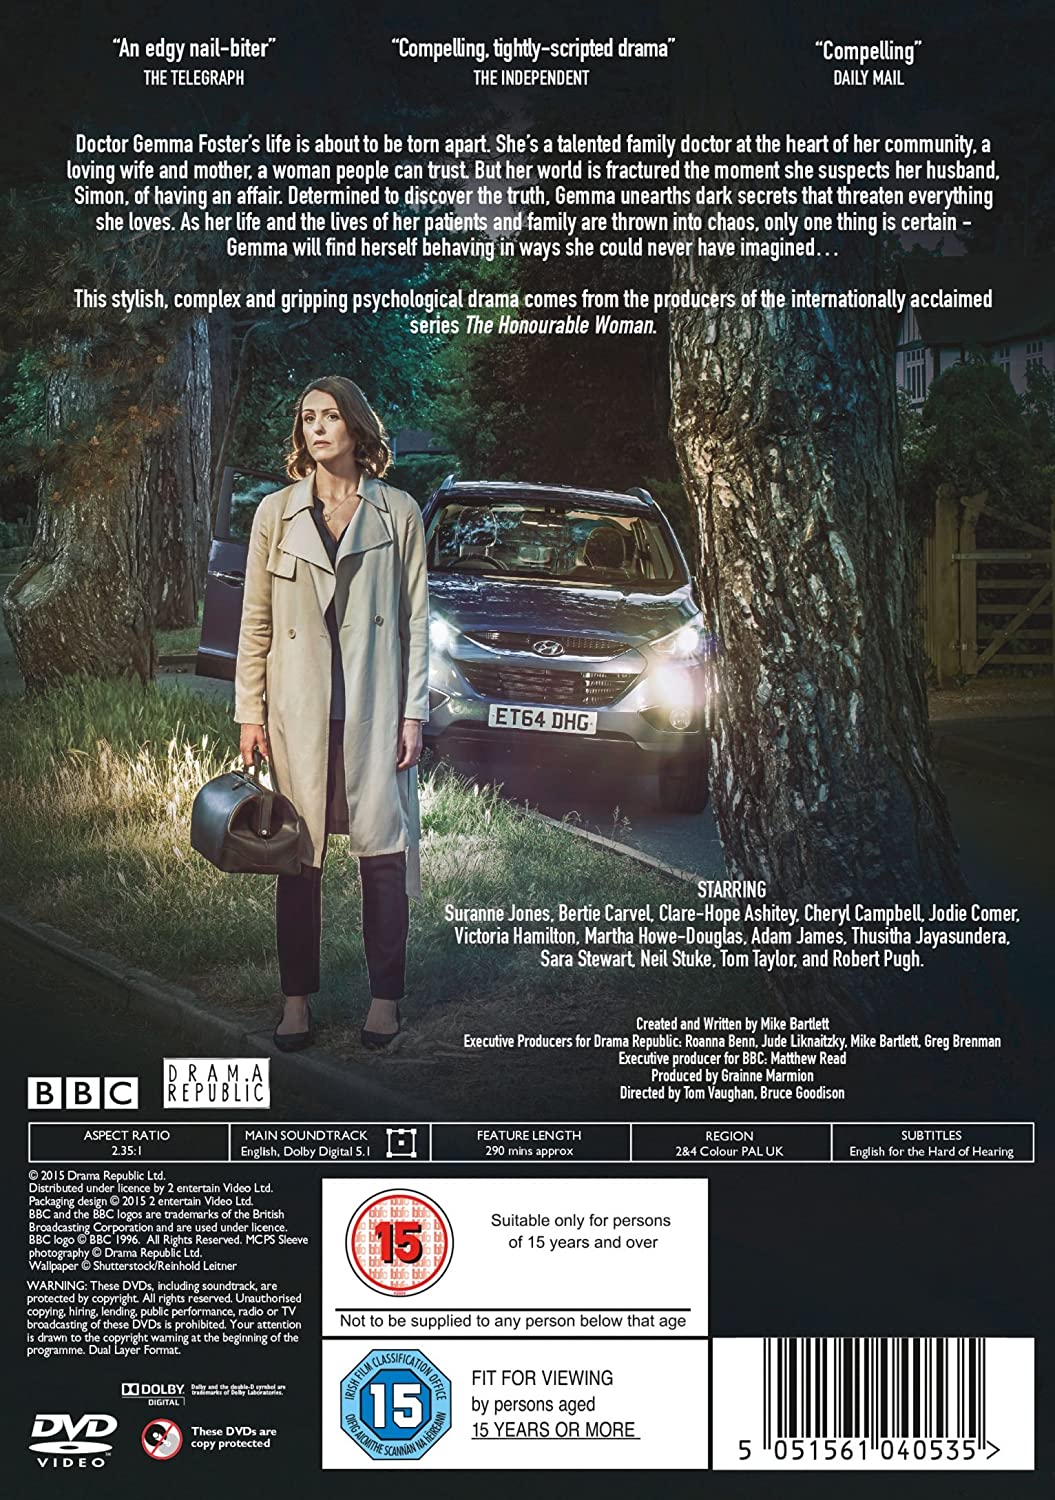 Doctor Foster Series 1 [DVD] [2015]